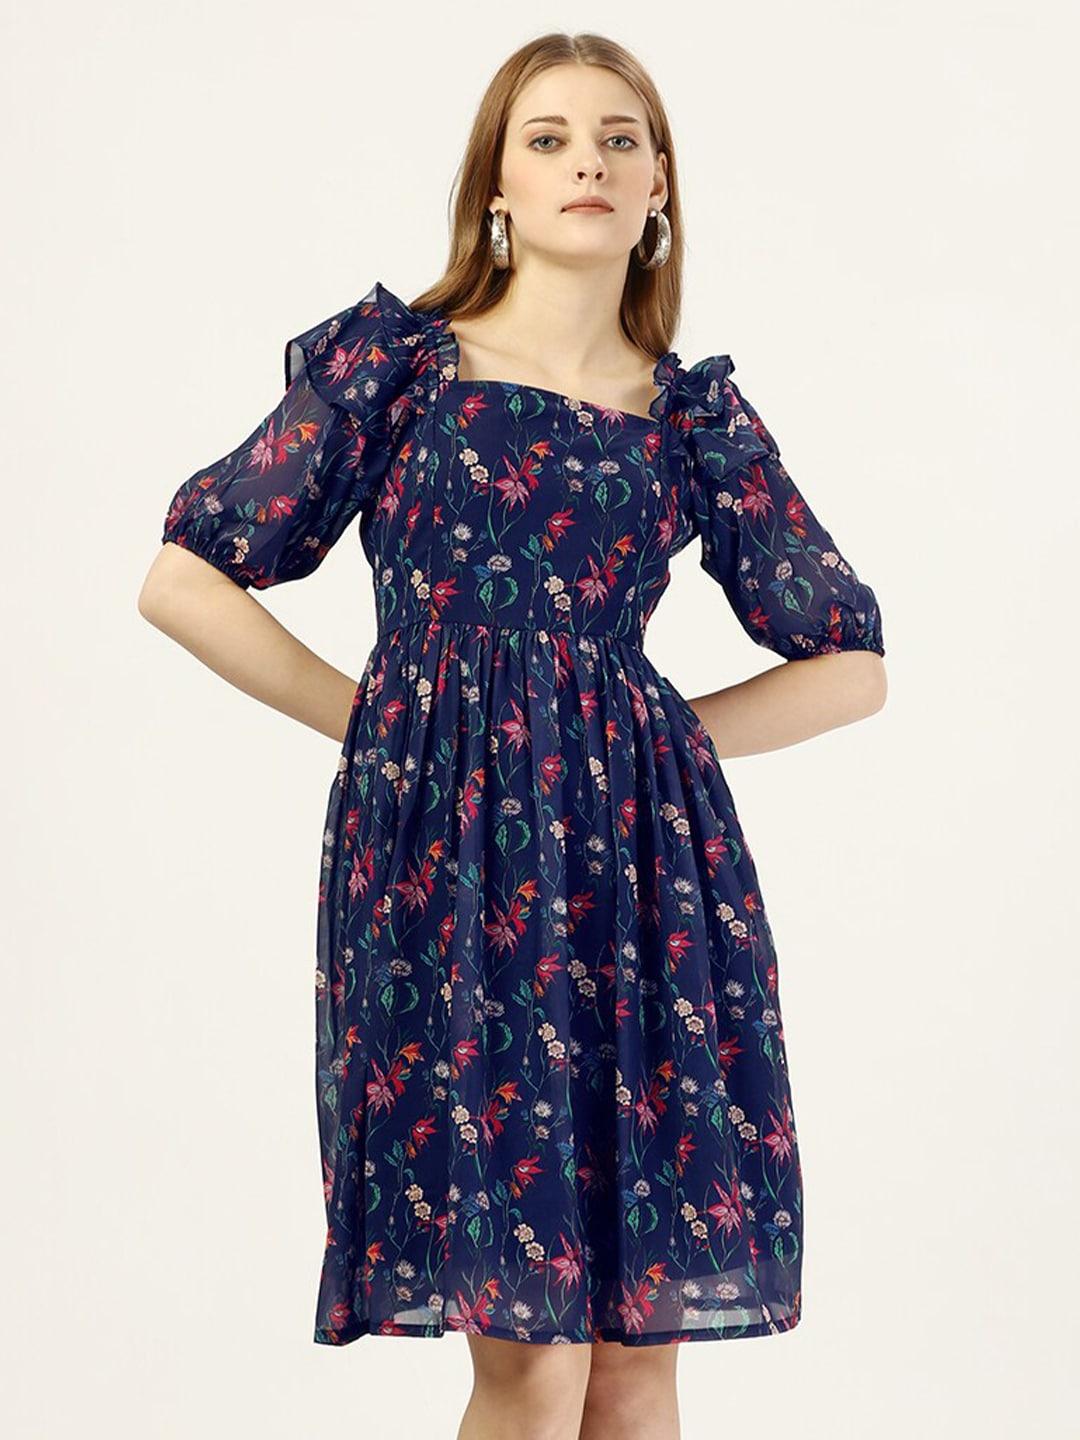 SEW YOU SOON Floral Printed Puff Sleeves Square Neck Ruffled Georgette Fit & Flare Dress